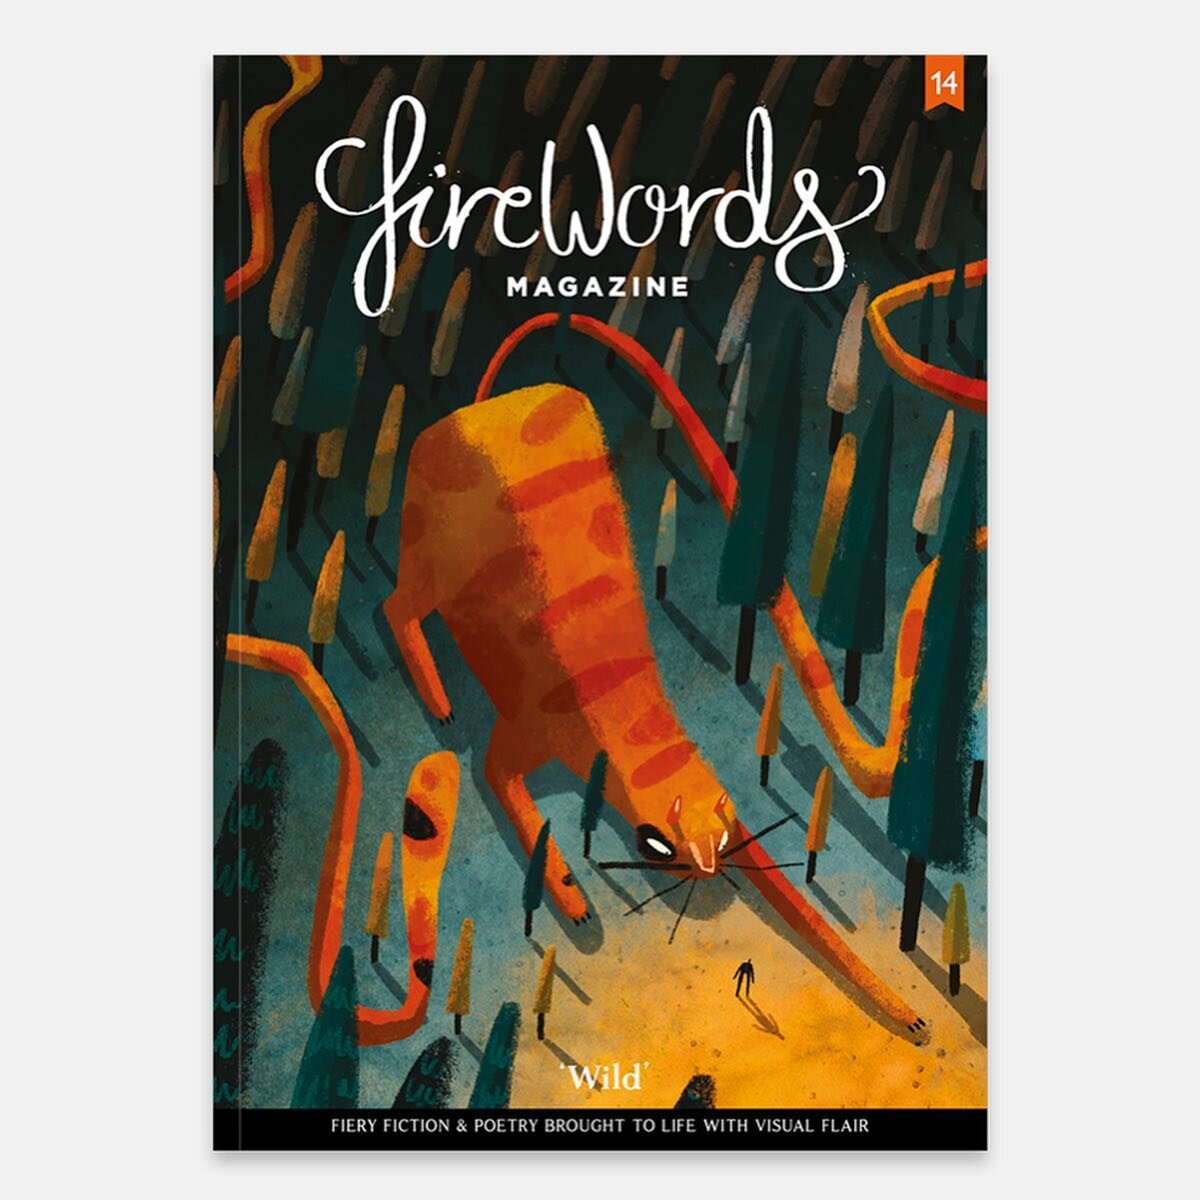 Here it is! 🔥🐱 The 'Wild' cover artwork for #Firewords14 by the amazing illustrator 
@ScottWilsonIllustrations
. It's available to order from Tues and we'll be sharing teasers of the artwork inside tomorrow...